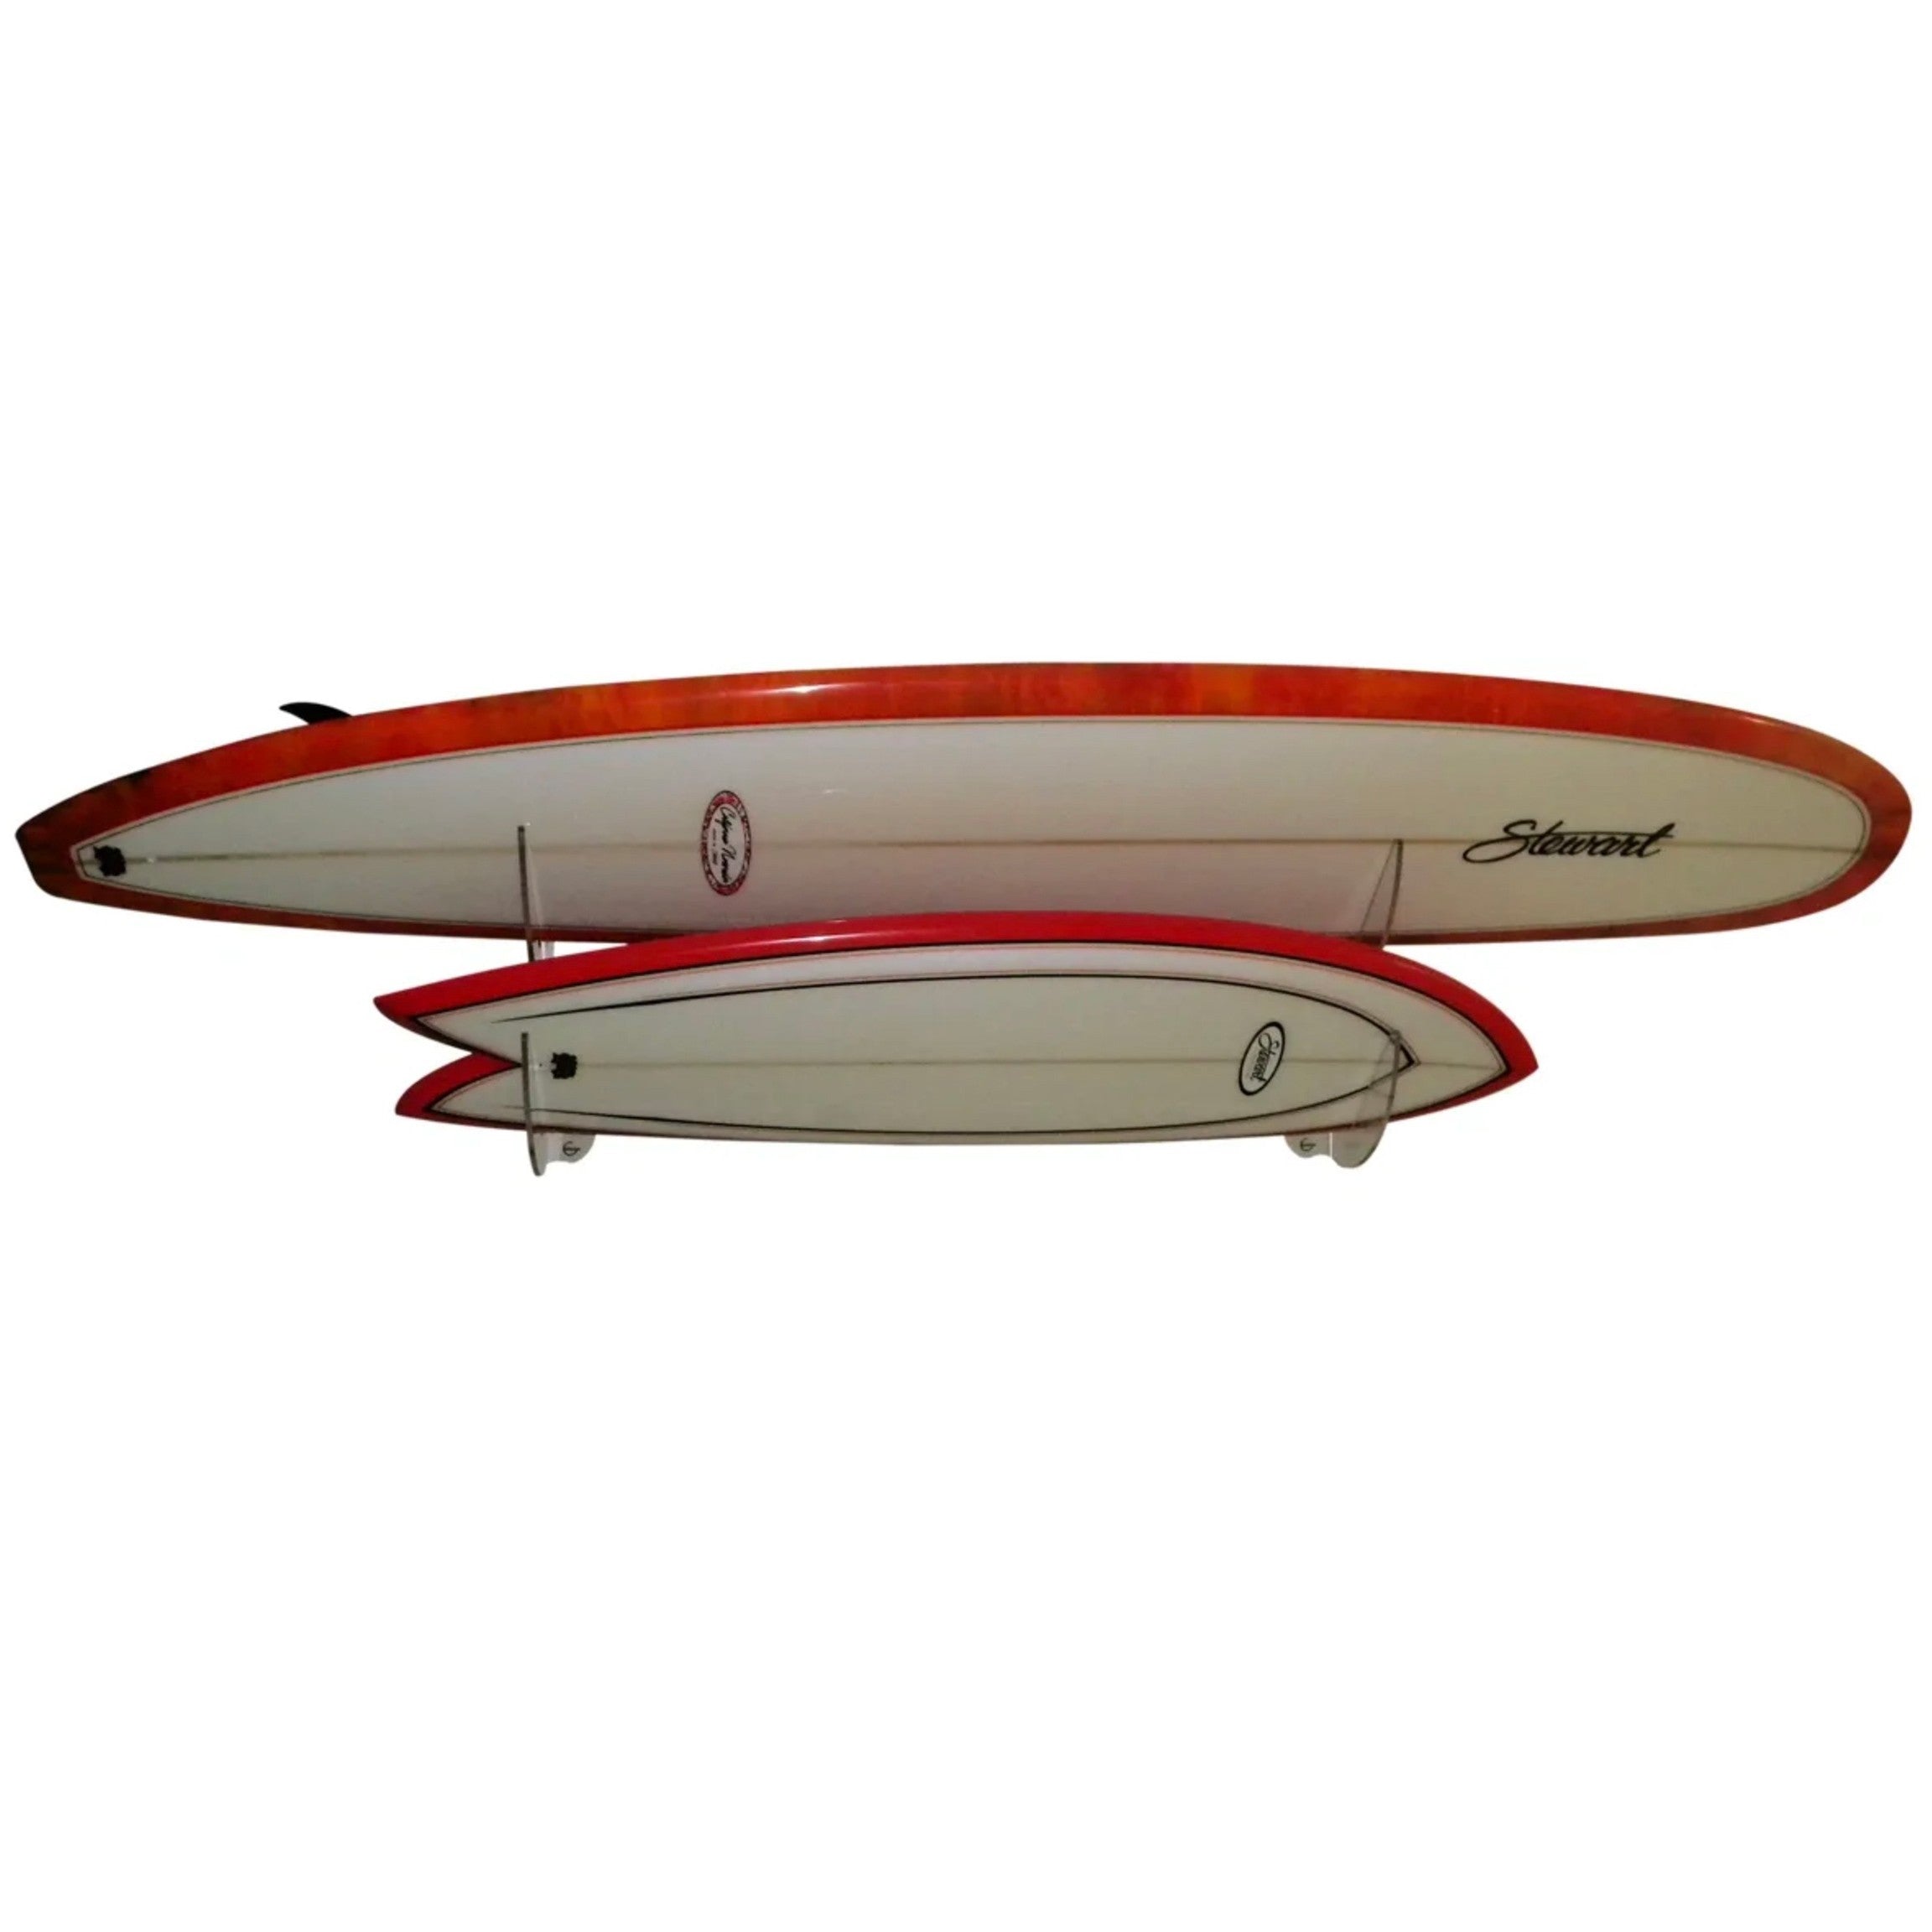 Soporte de Pared Horizontal Doble ON THE WALL 45° Shortboards, Longboards, SUP